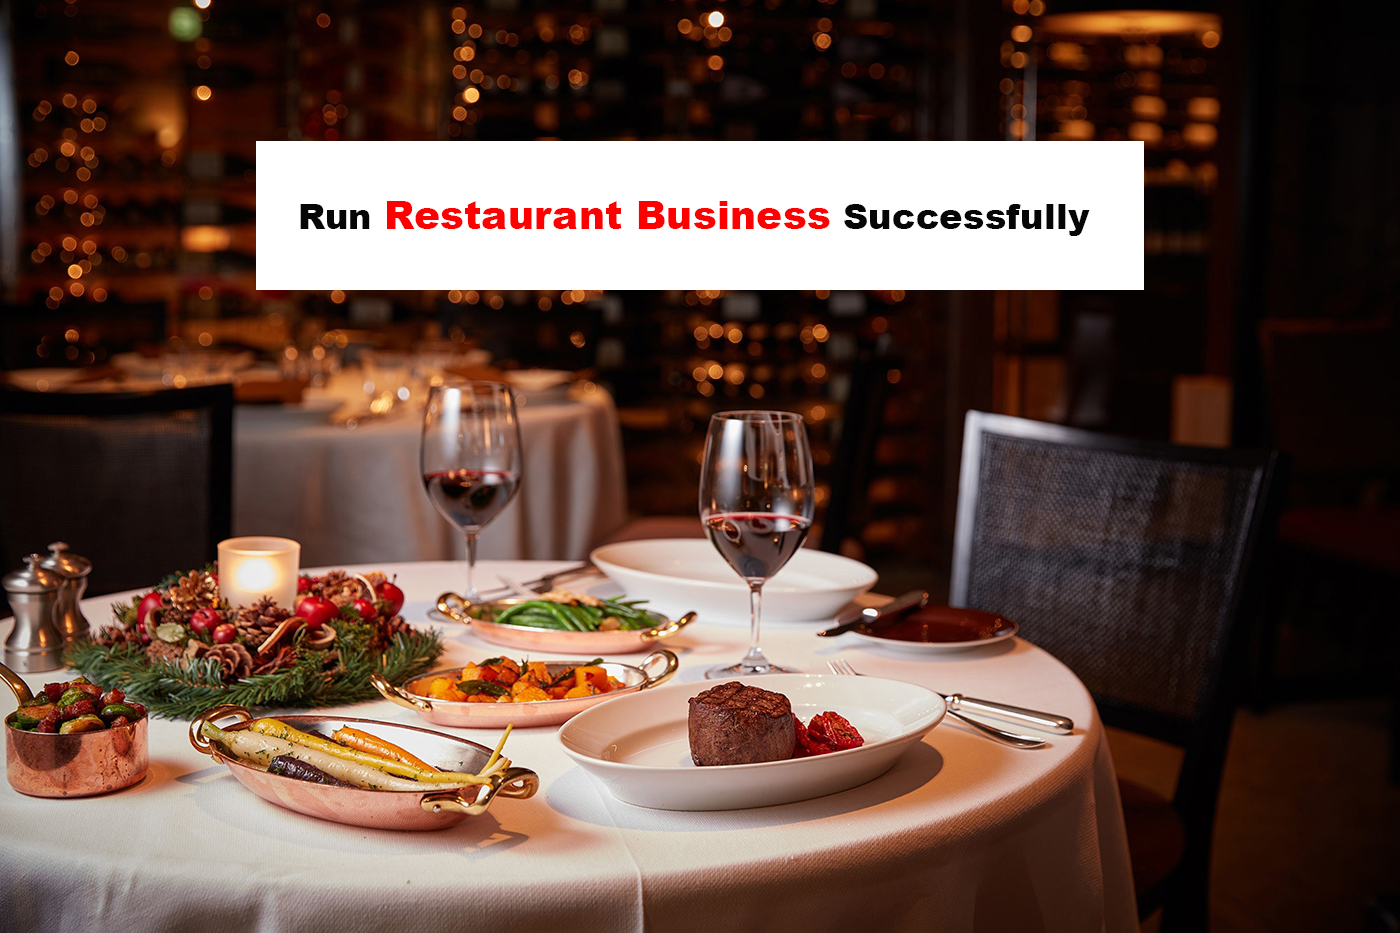 How to Run a Restaurant Business Successfully